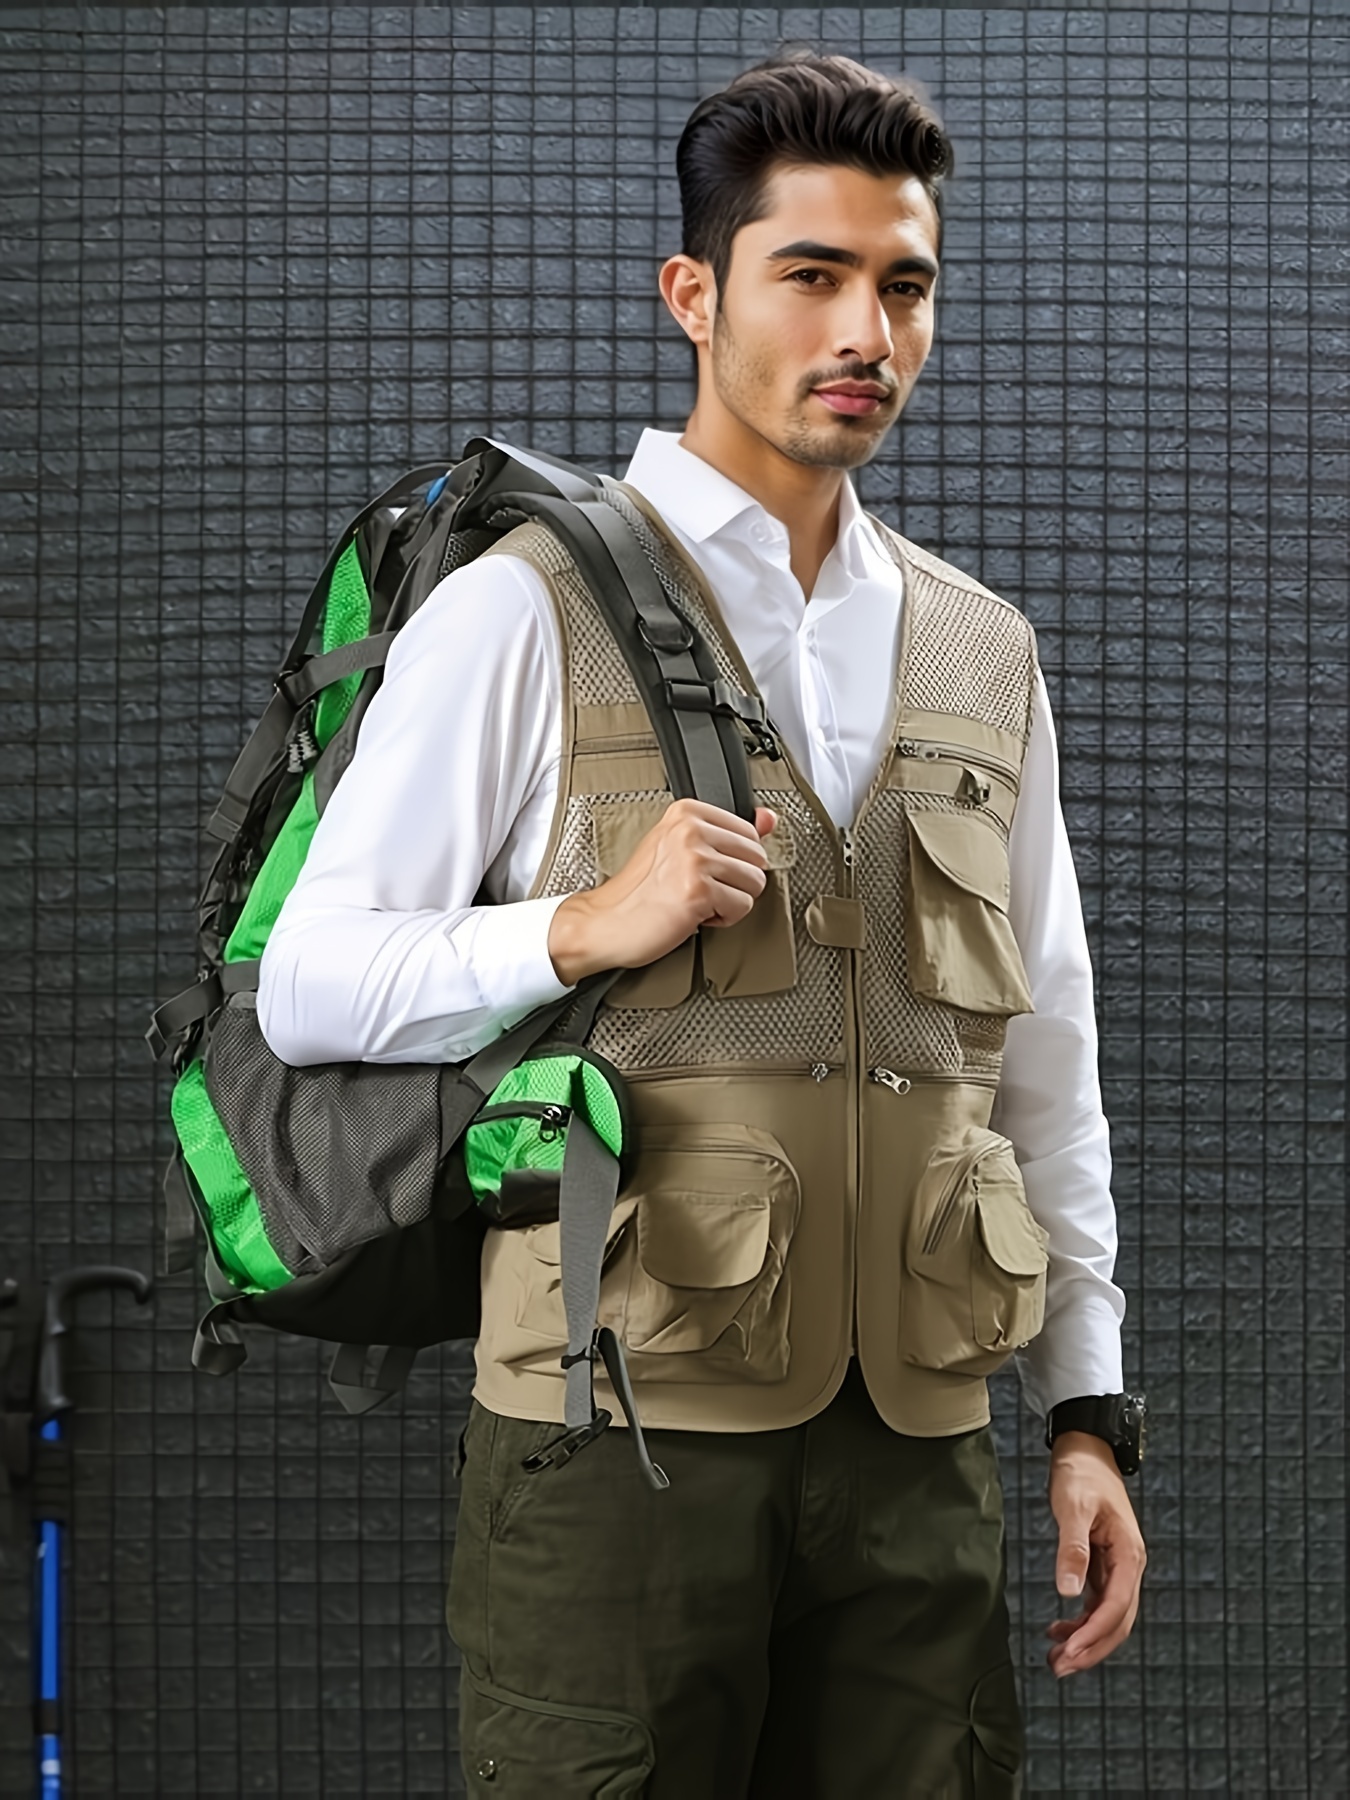 TMOYZQ Men's Outdoor Fishing Vest Casual Work Mesh Lined Vests